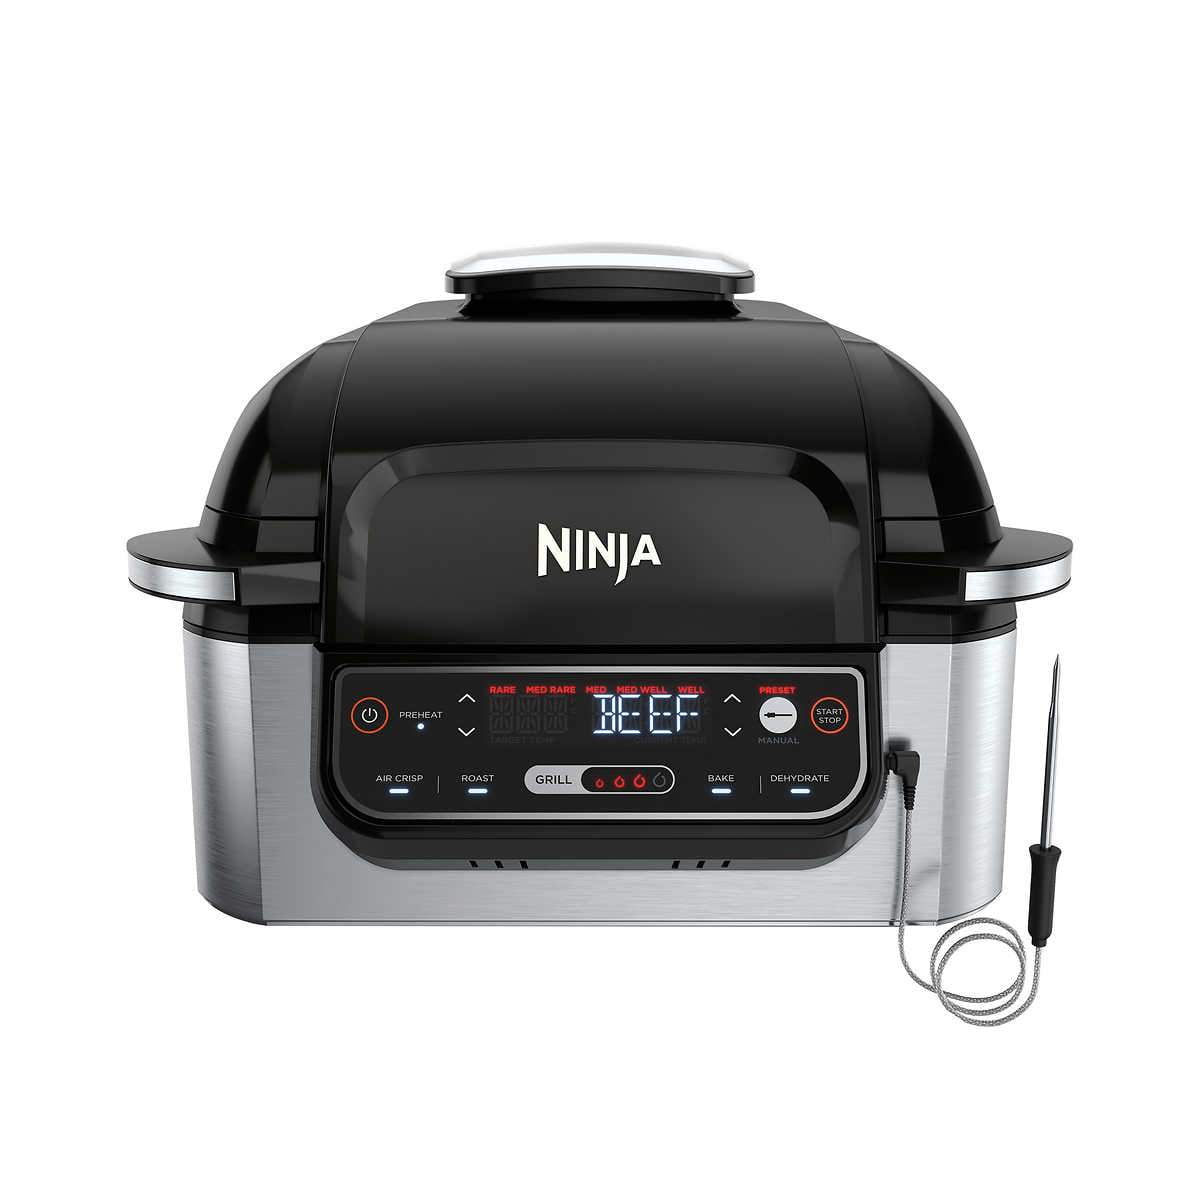 Ninja Foodi LG450 Smart 5-in-1 Indoor Grill with Smart Thermometer  (Stainless Steel/ Black) - Certified Refurbished 